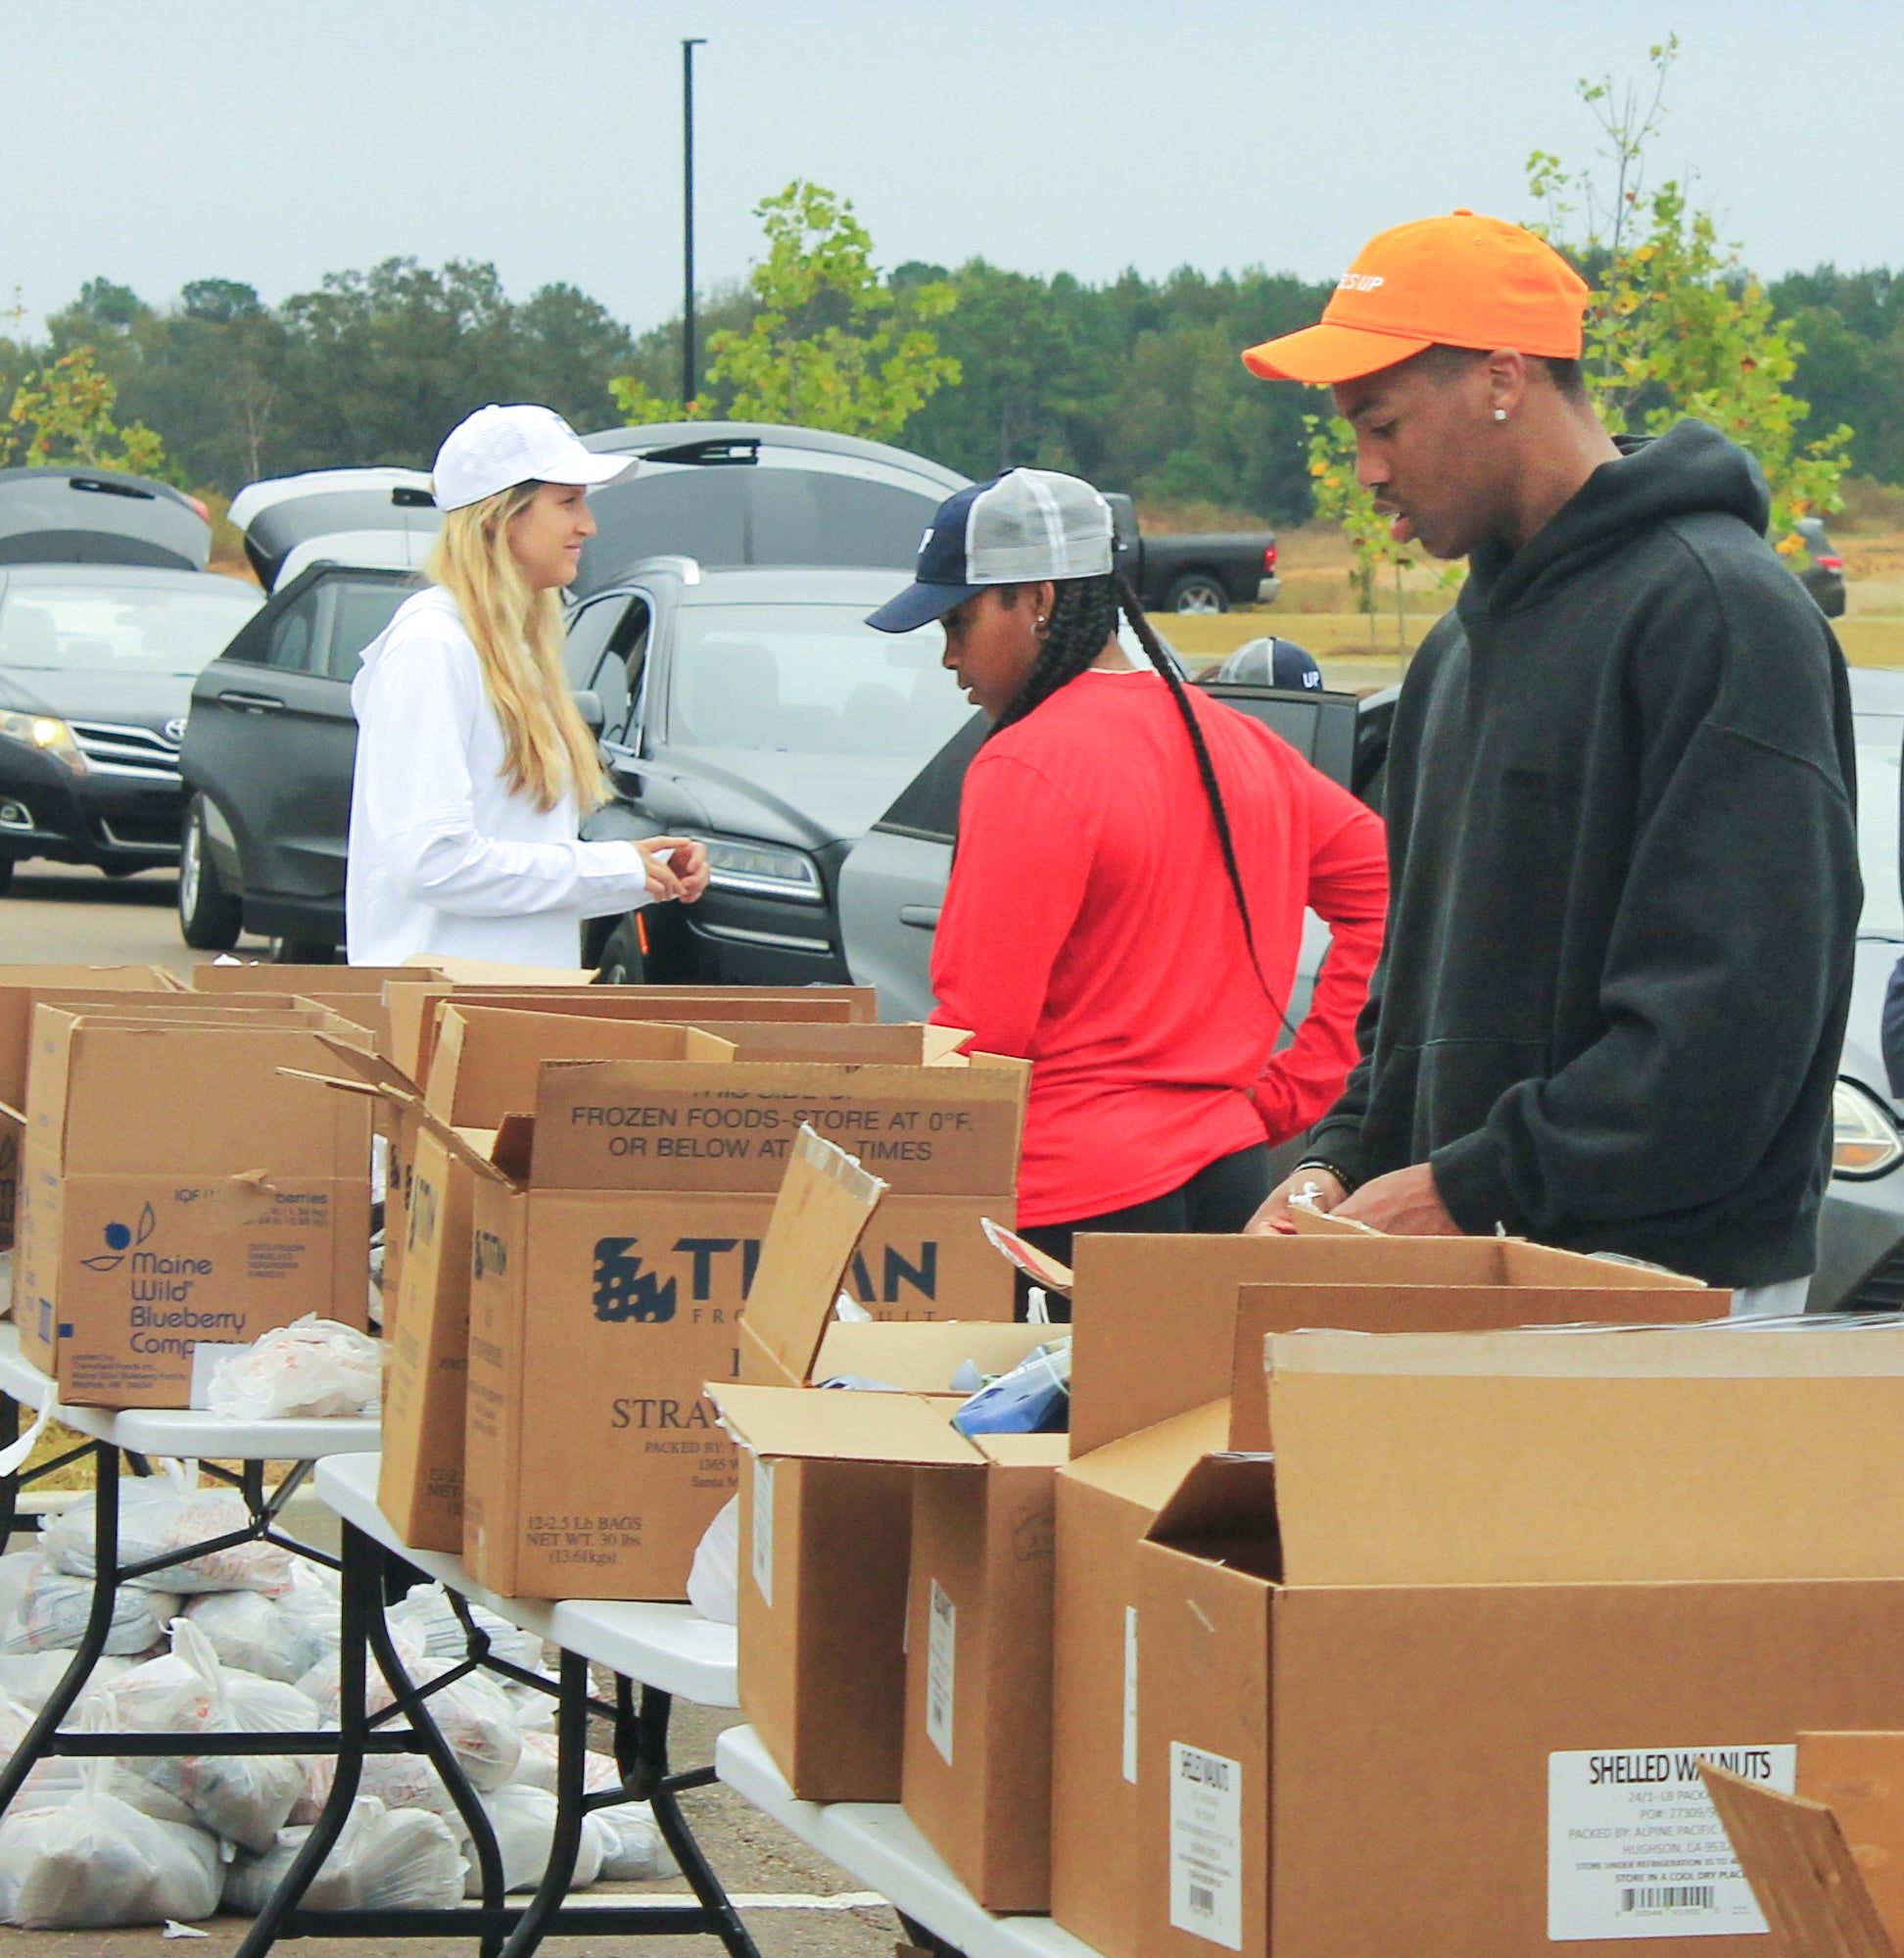 Ole Miss athletes partner with Wheels Up, Grove Collective, and Brandr Group to aid Oxford families through a service day at Mid-South Food Bank.